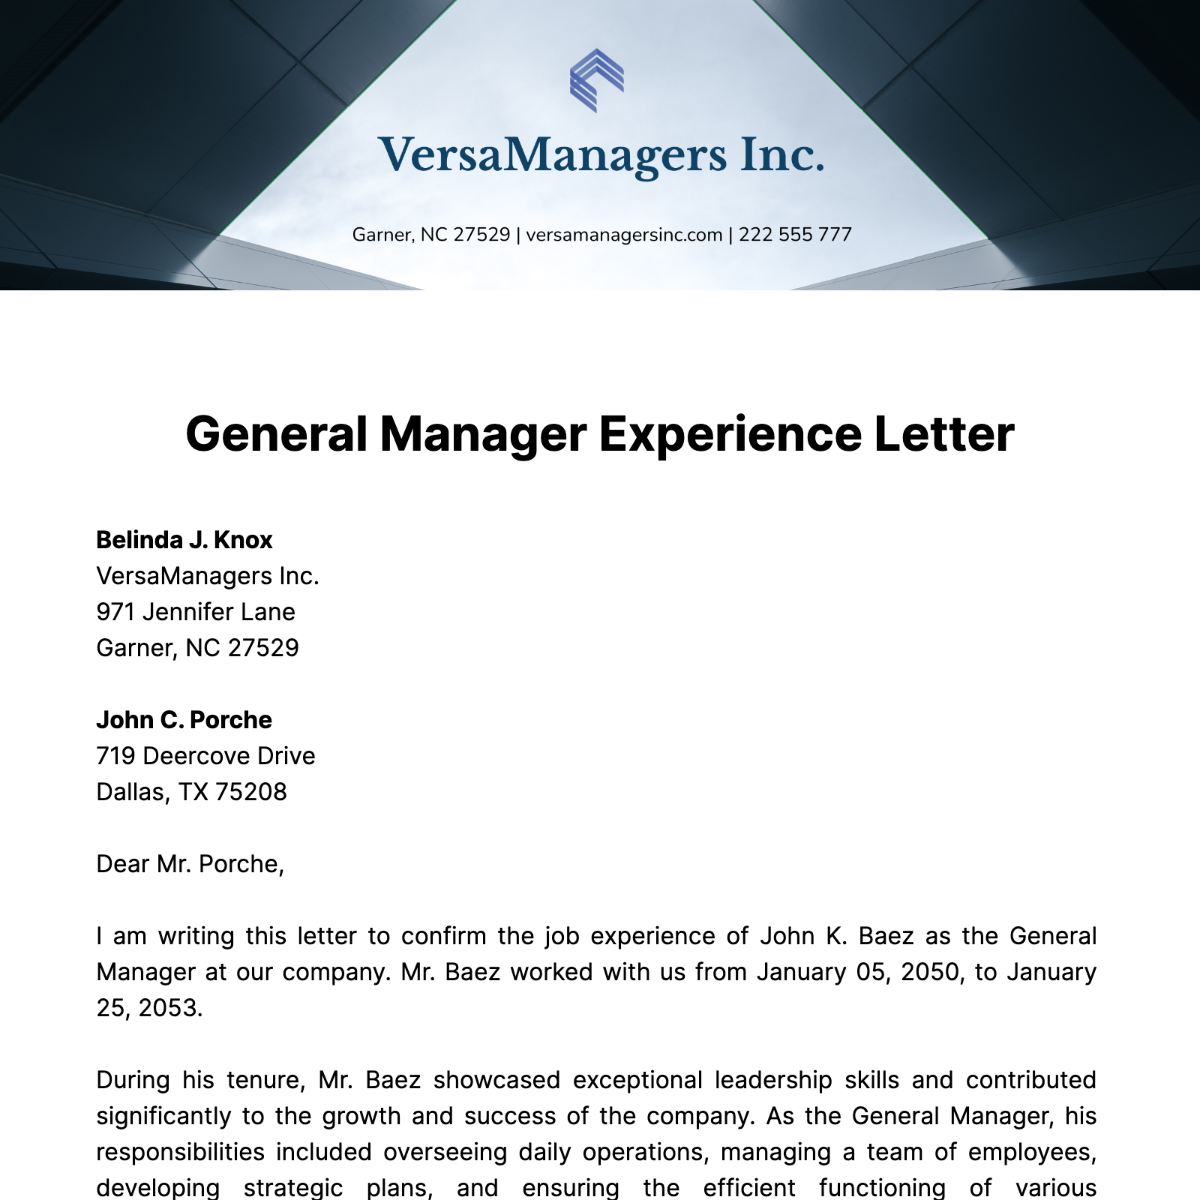 General Manager Experience Letter   Template